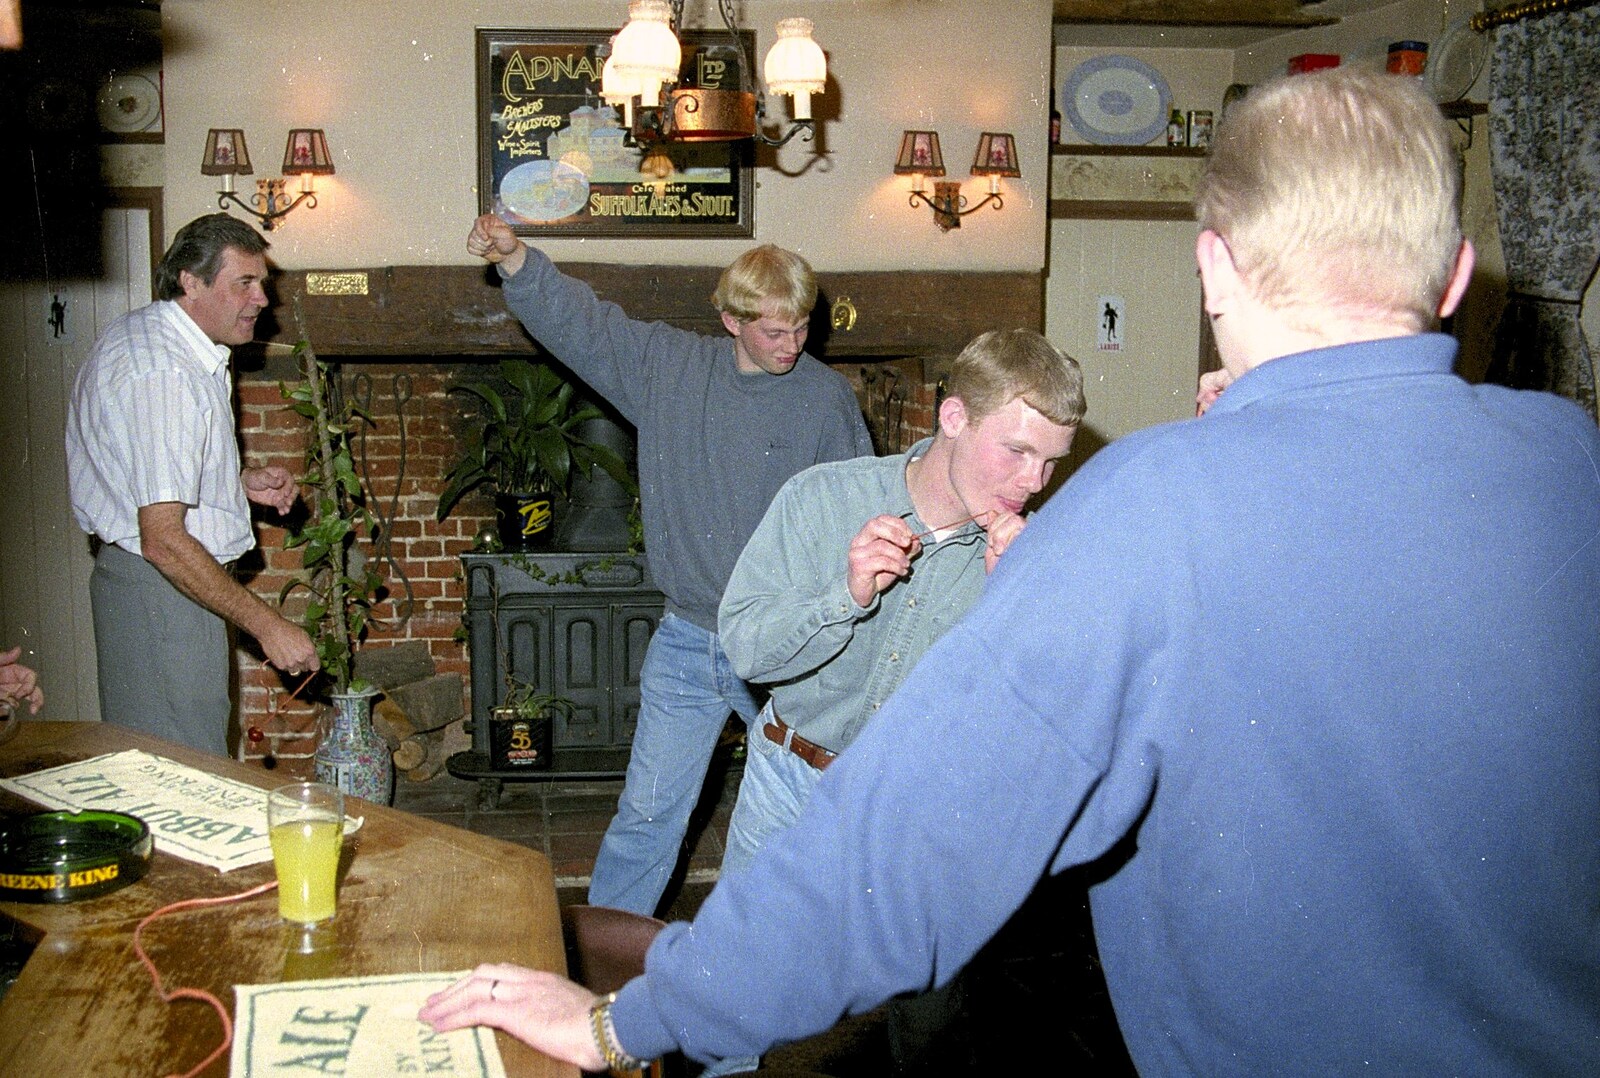 Paul's conker disappears from A Conkers Night and CISU in the Eagle, Brome and Ipswich, Suffolk - 14th September 1996